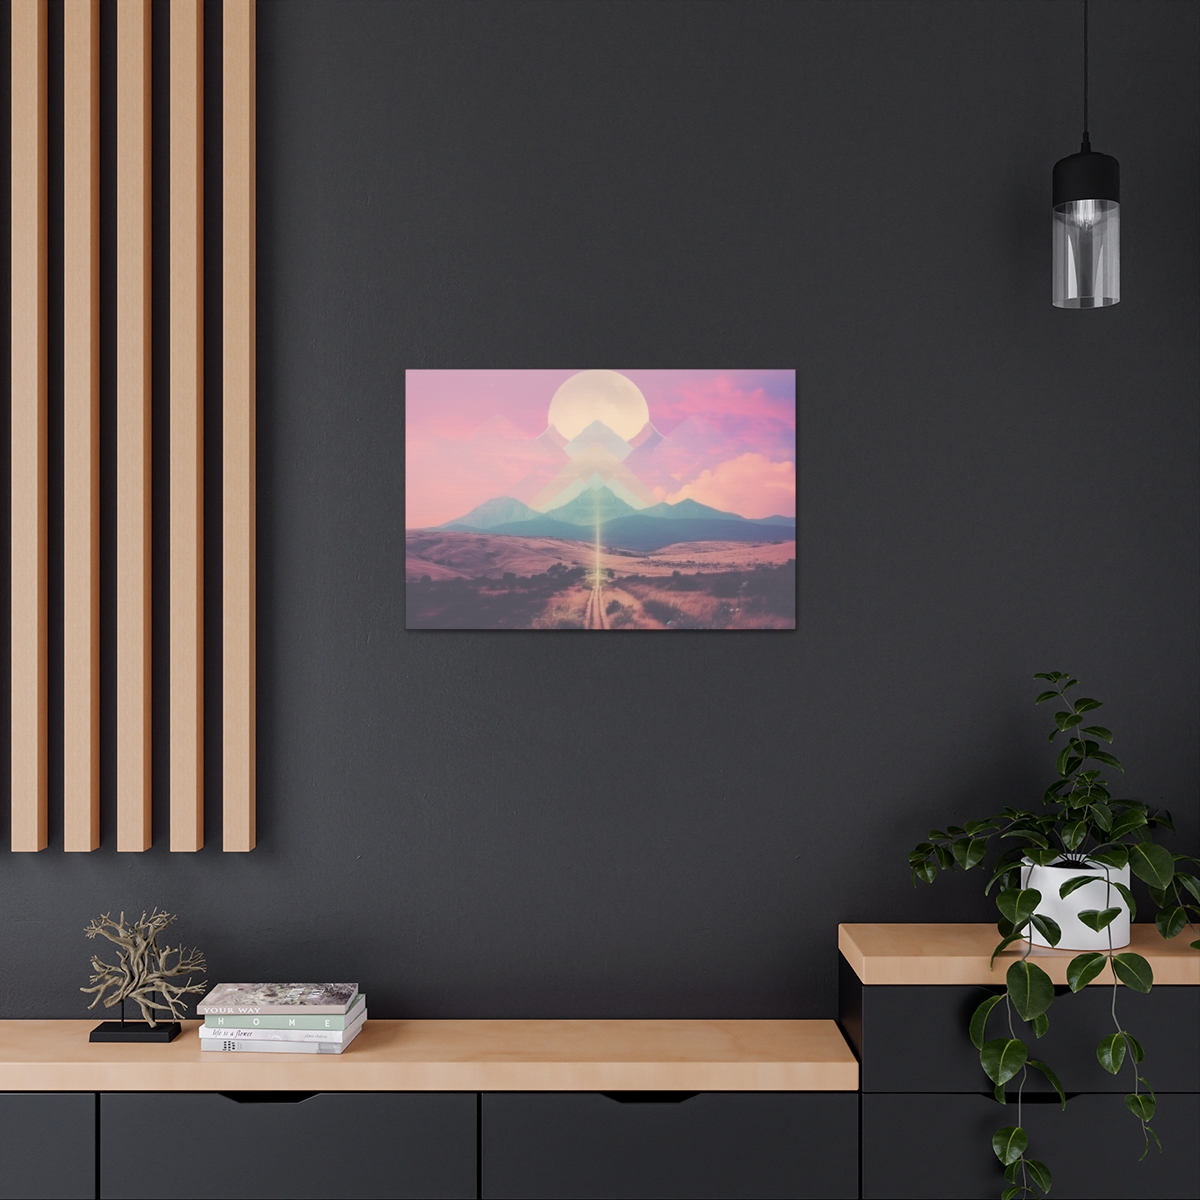 Ethereal Nature Art Canvas Print: A Scenery From Your Dream